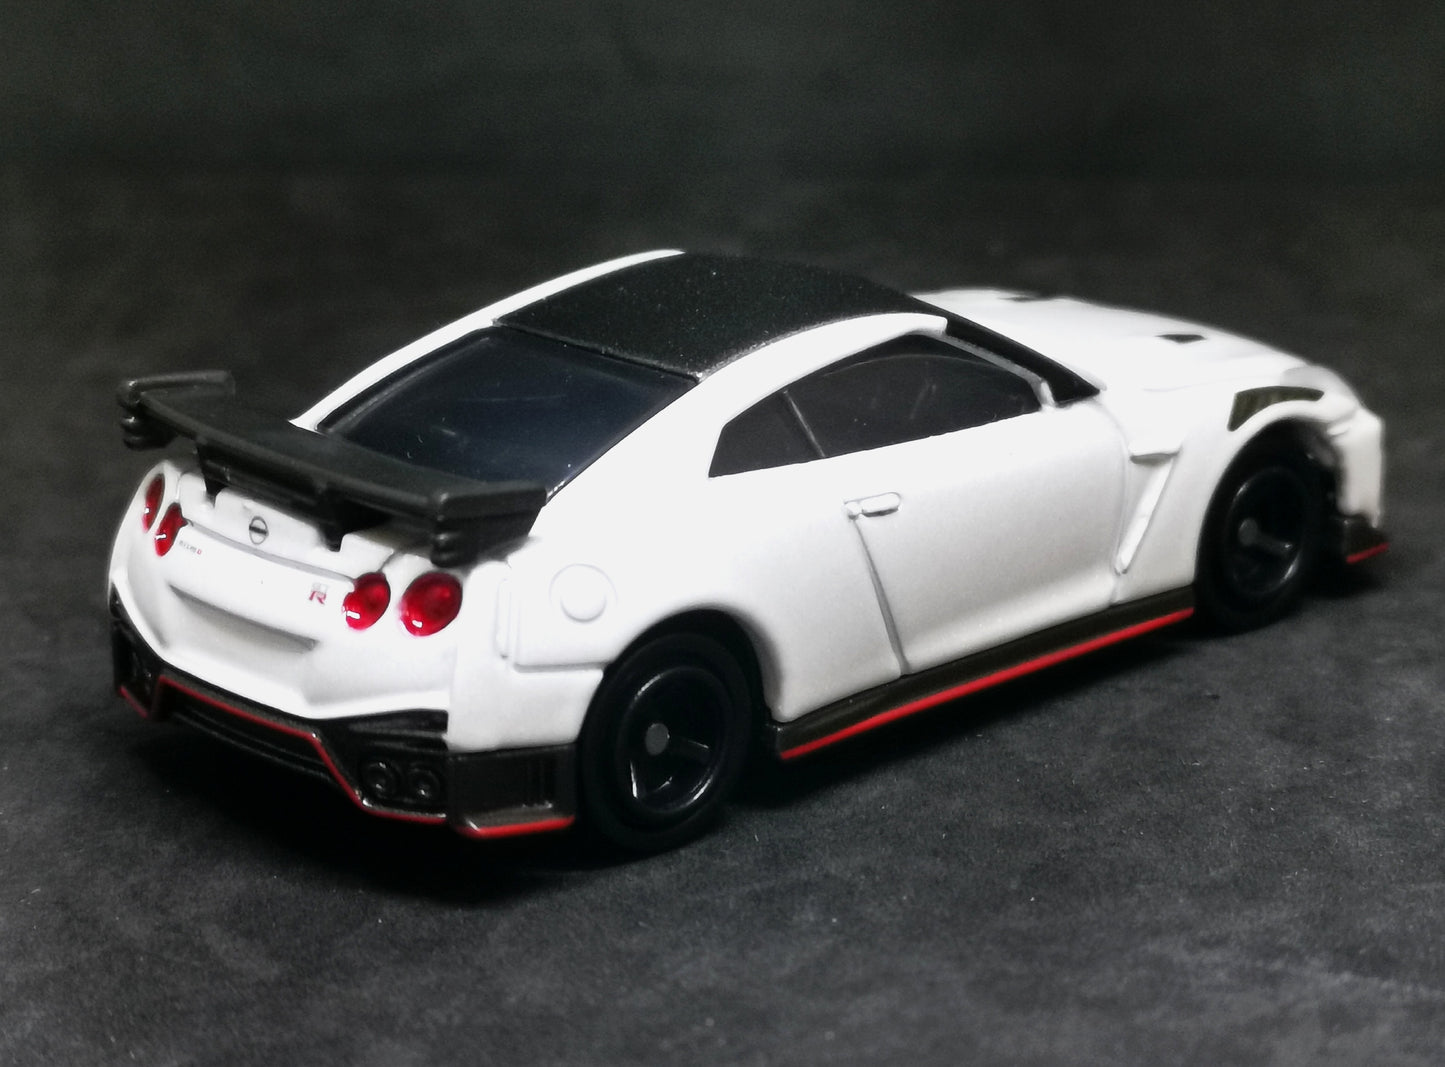 Tomica #78 Nissan GT-R Nismo 2020 Model 1:62 Scale